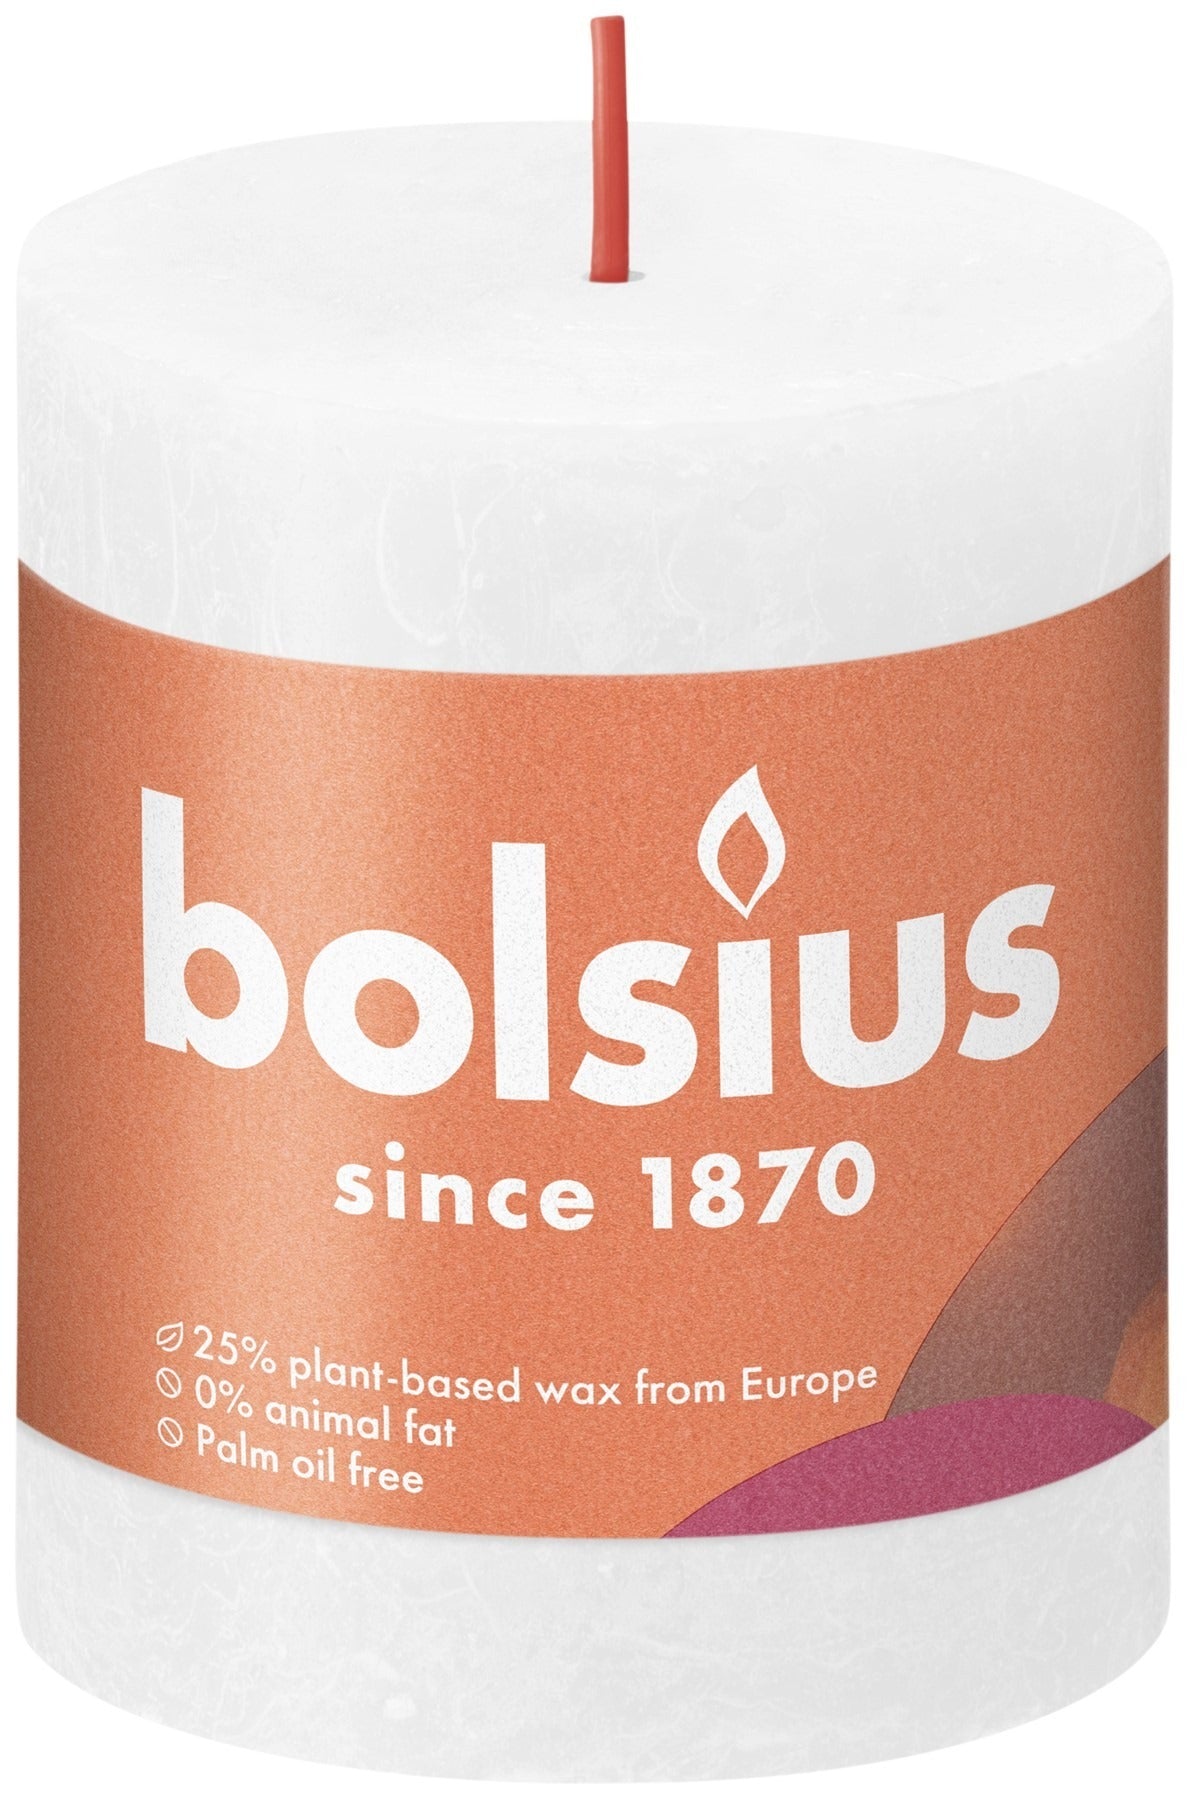 View Cloudy White Bolsius Rustic Shine Pillar Candle 80 x 68mm information